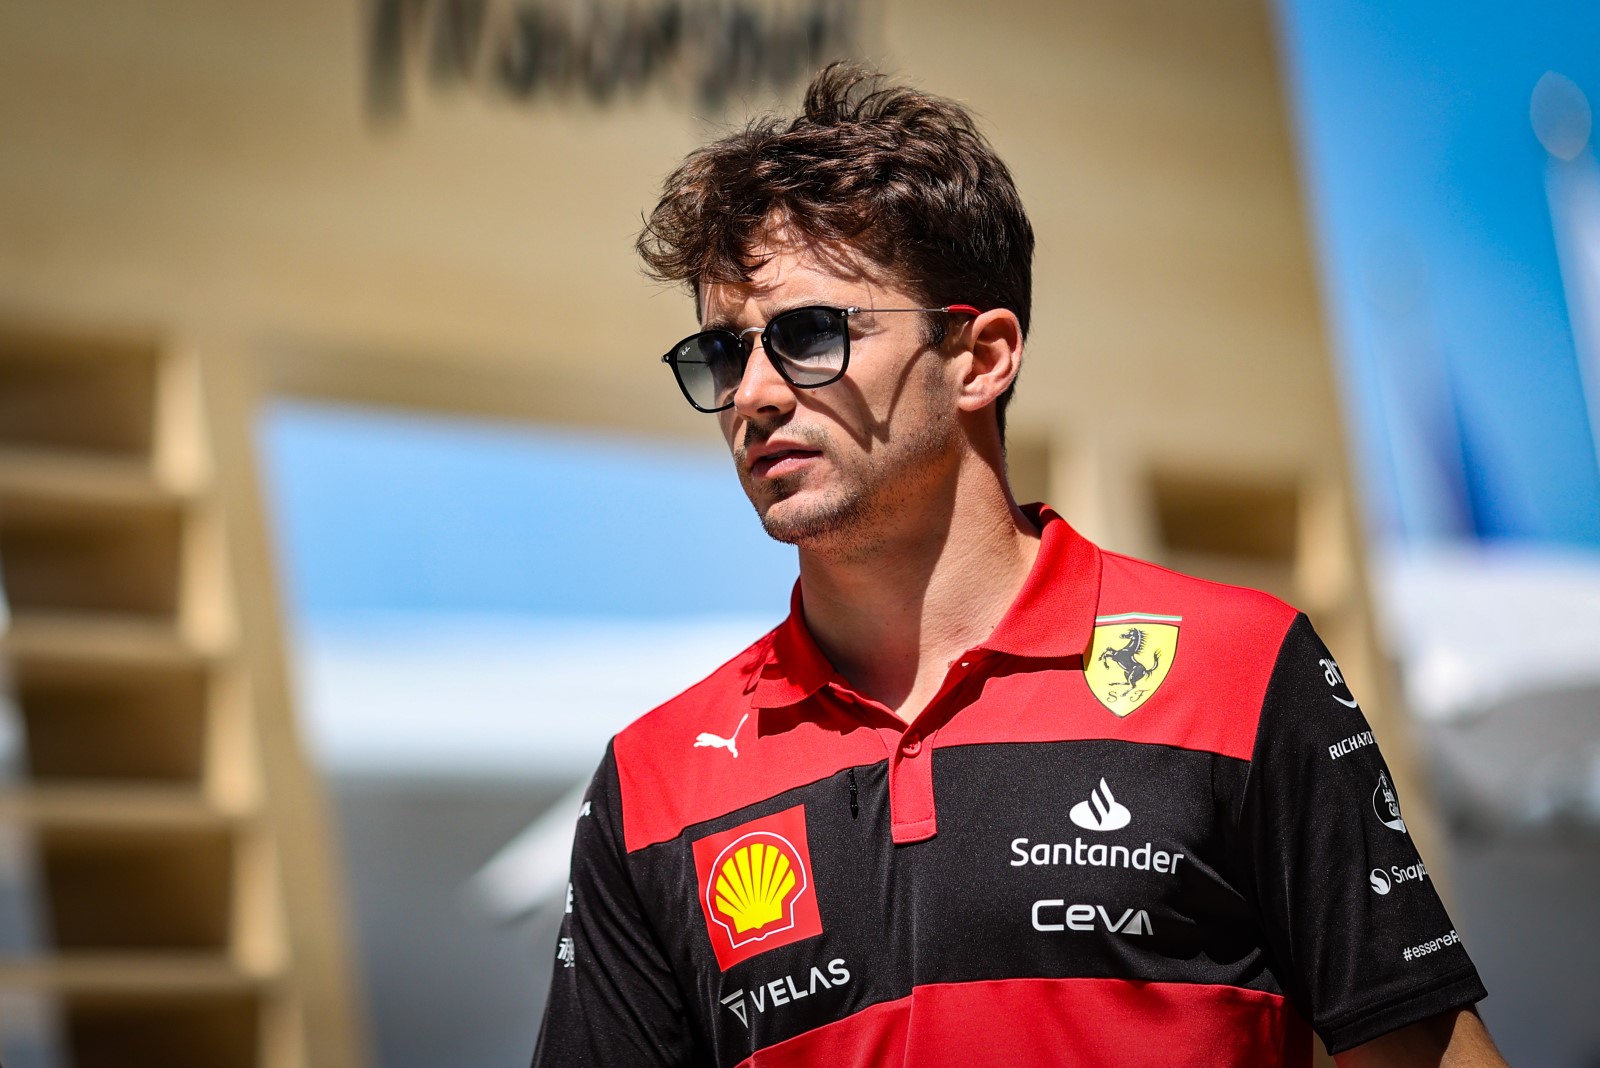 Charles Leclerc goest fastest in Miami, Russell and Verstappen close behind – Miami GP FP1